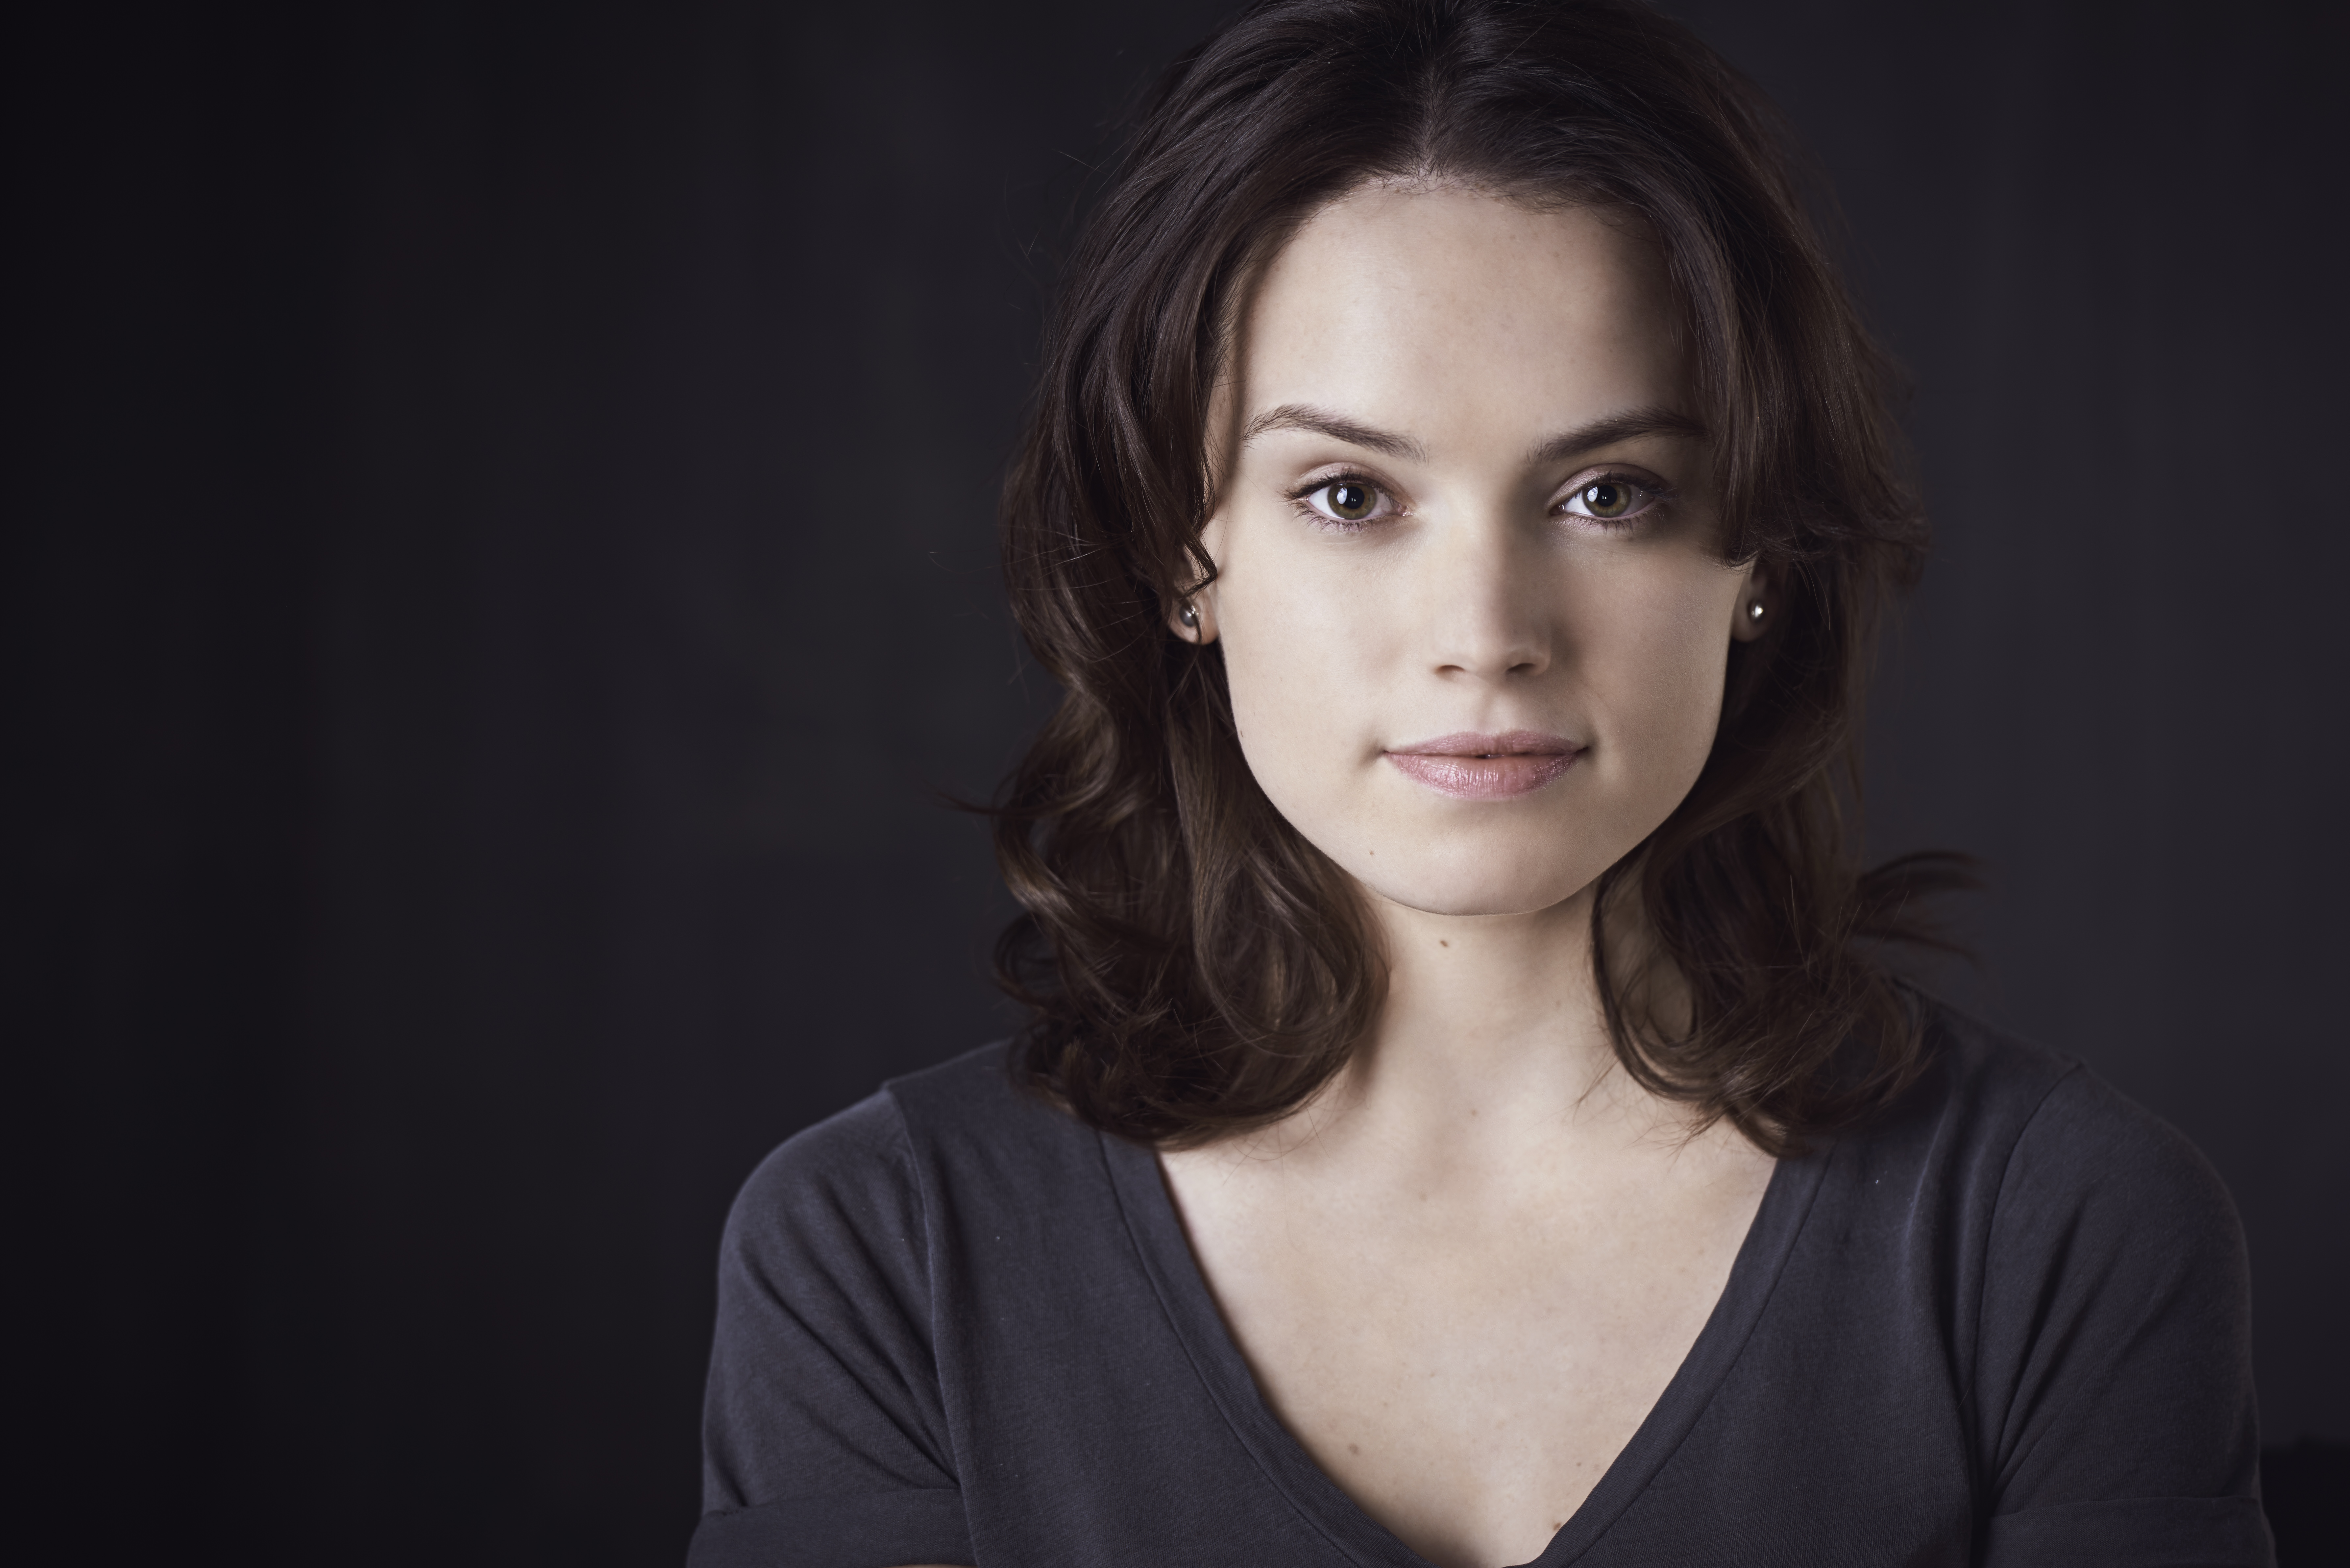 Daisy Ridley
                              The only new woman to join the Star Wars family, Ridley's previous roles have been limited to primarily British television.